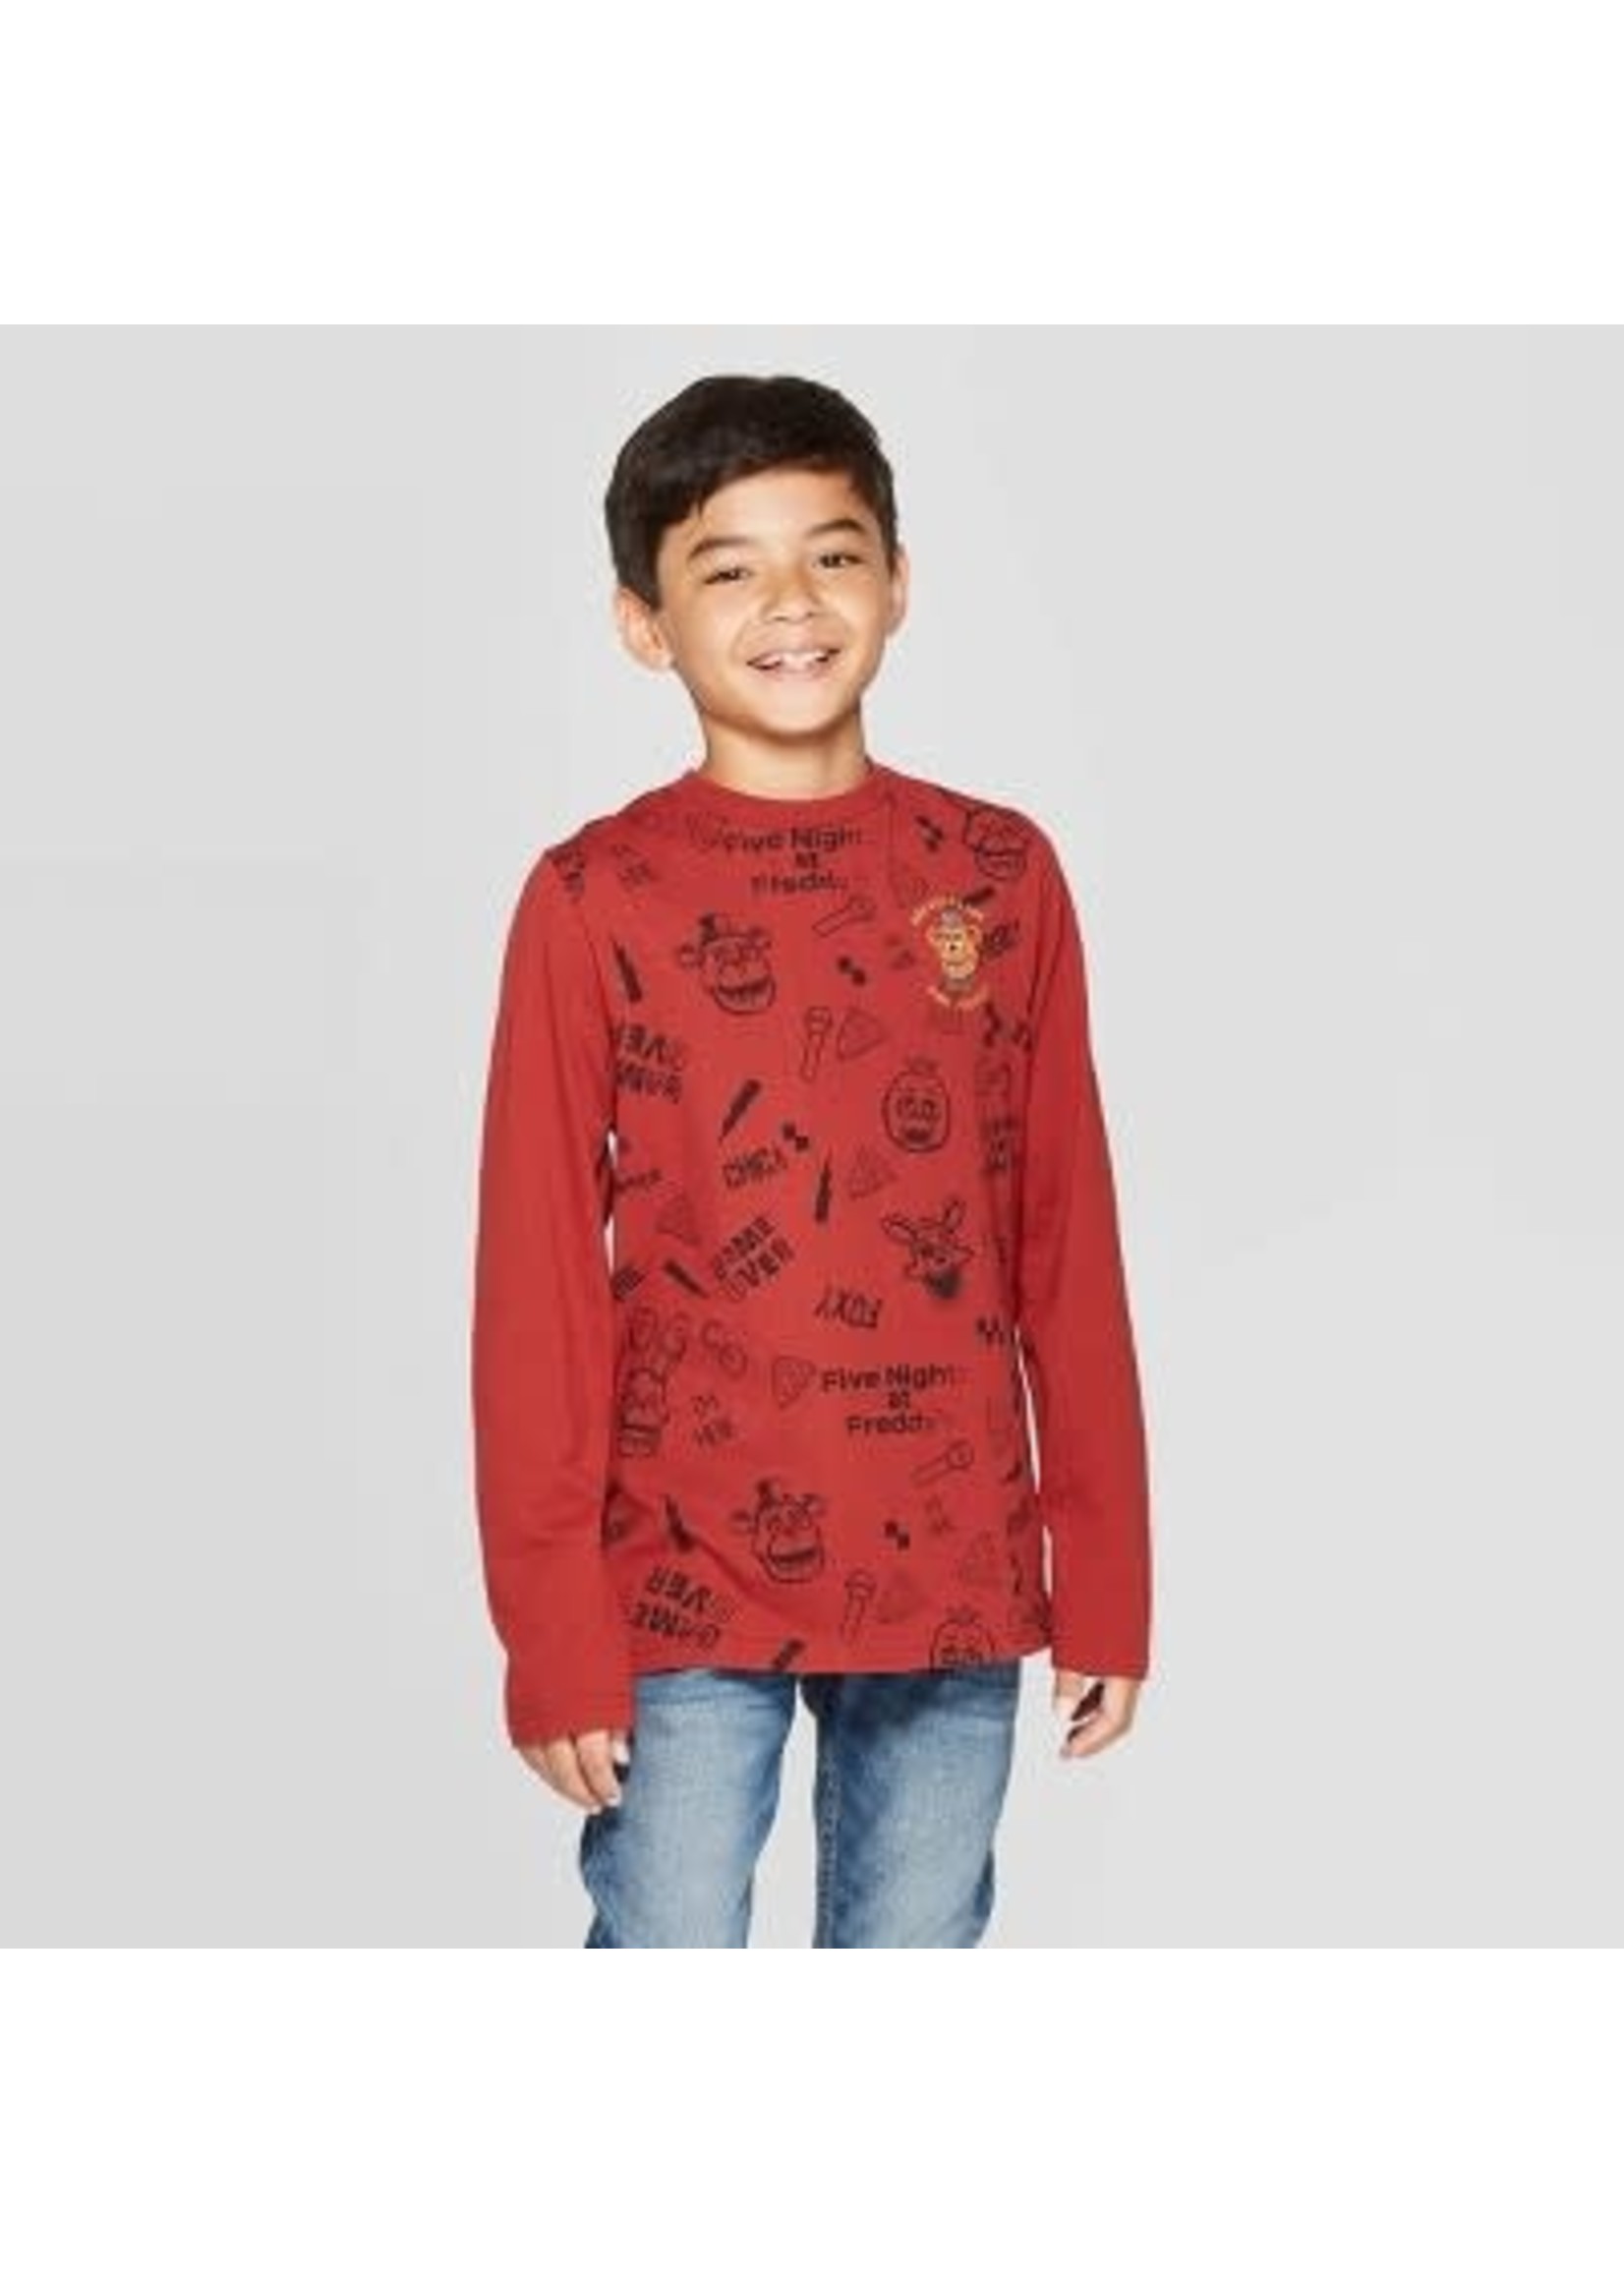 Boys' Five Nights at Freddy's Long Sleeve T-Shirt - Red XS